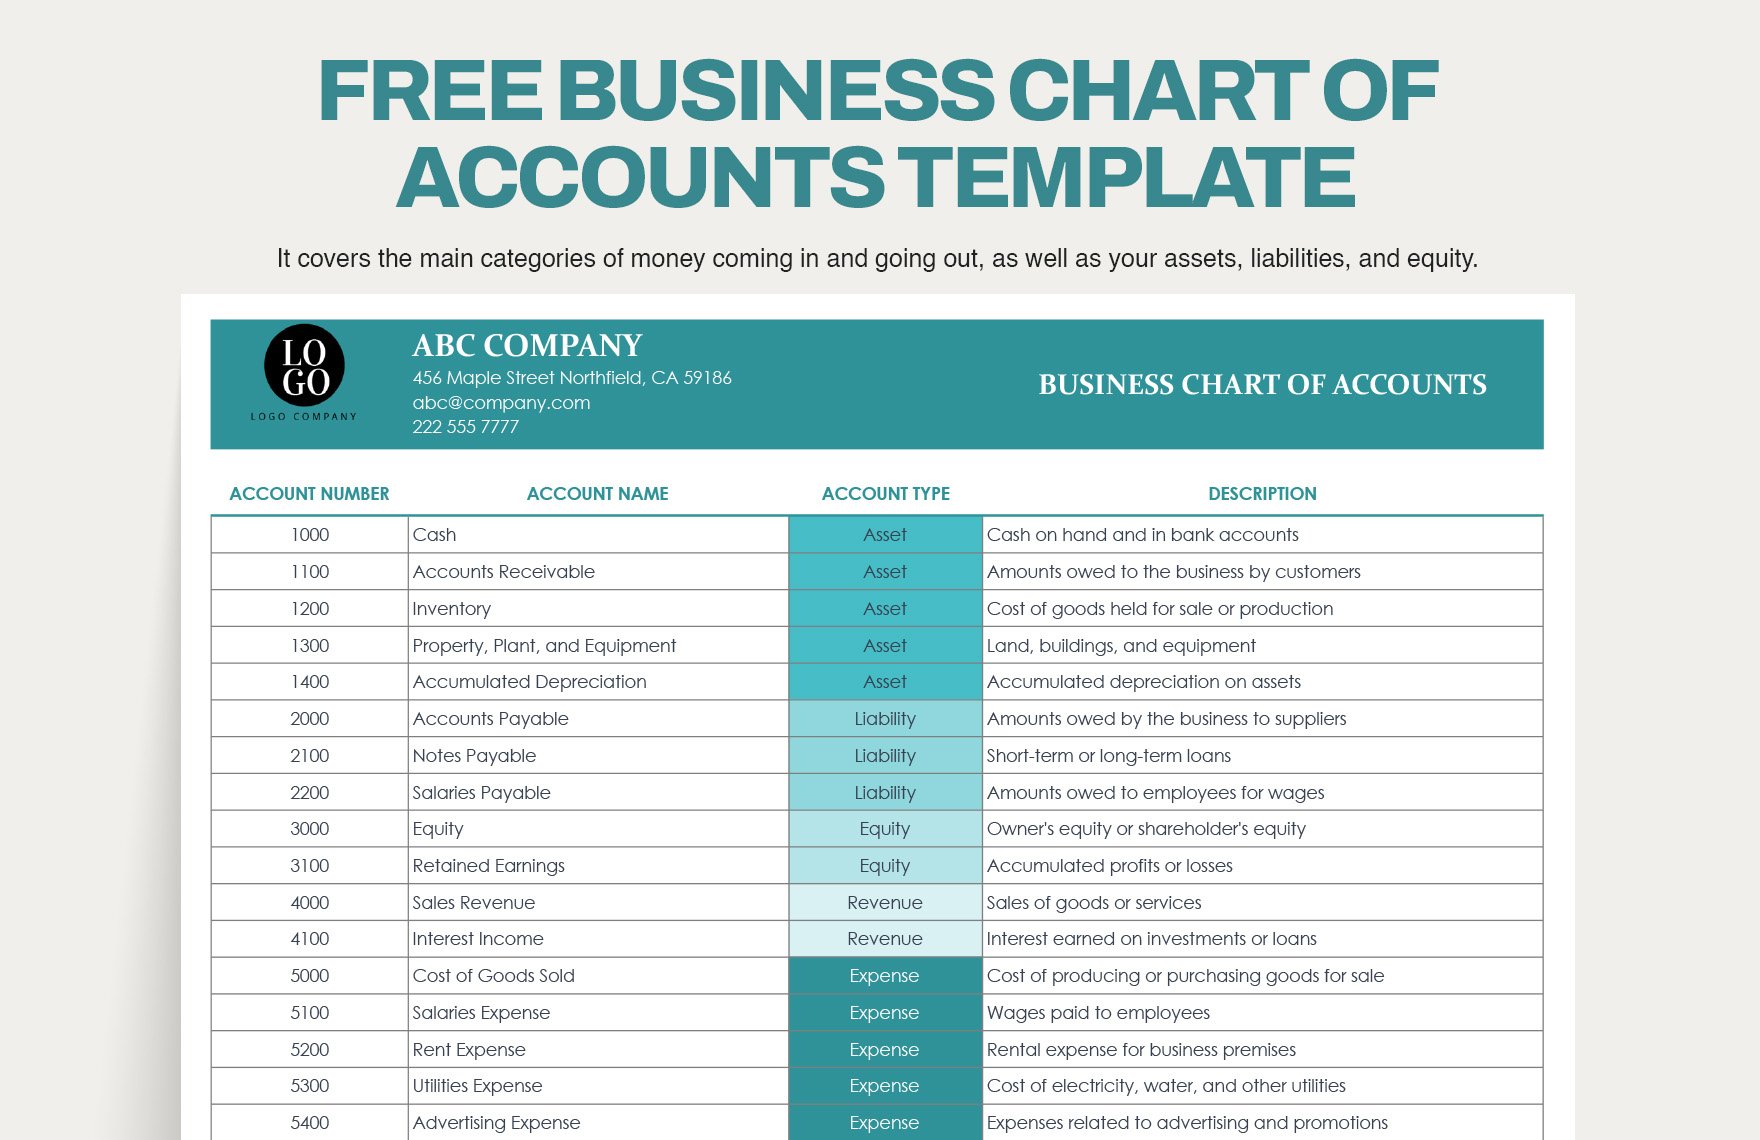 Free Business Chart of Accounts Template